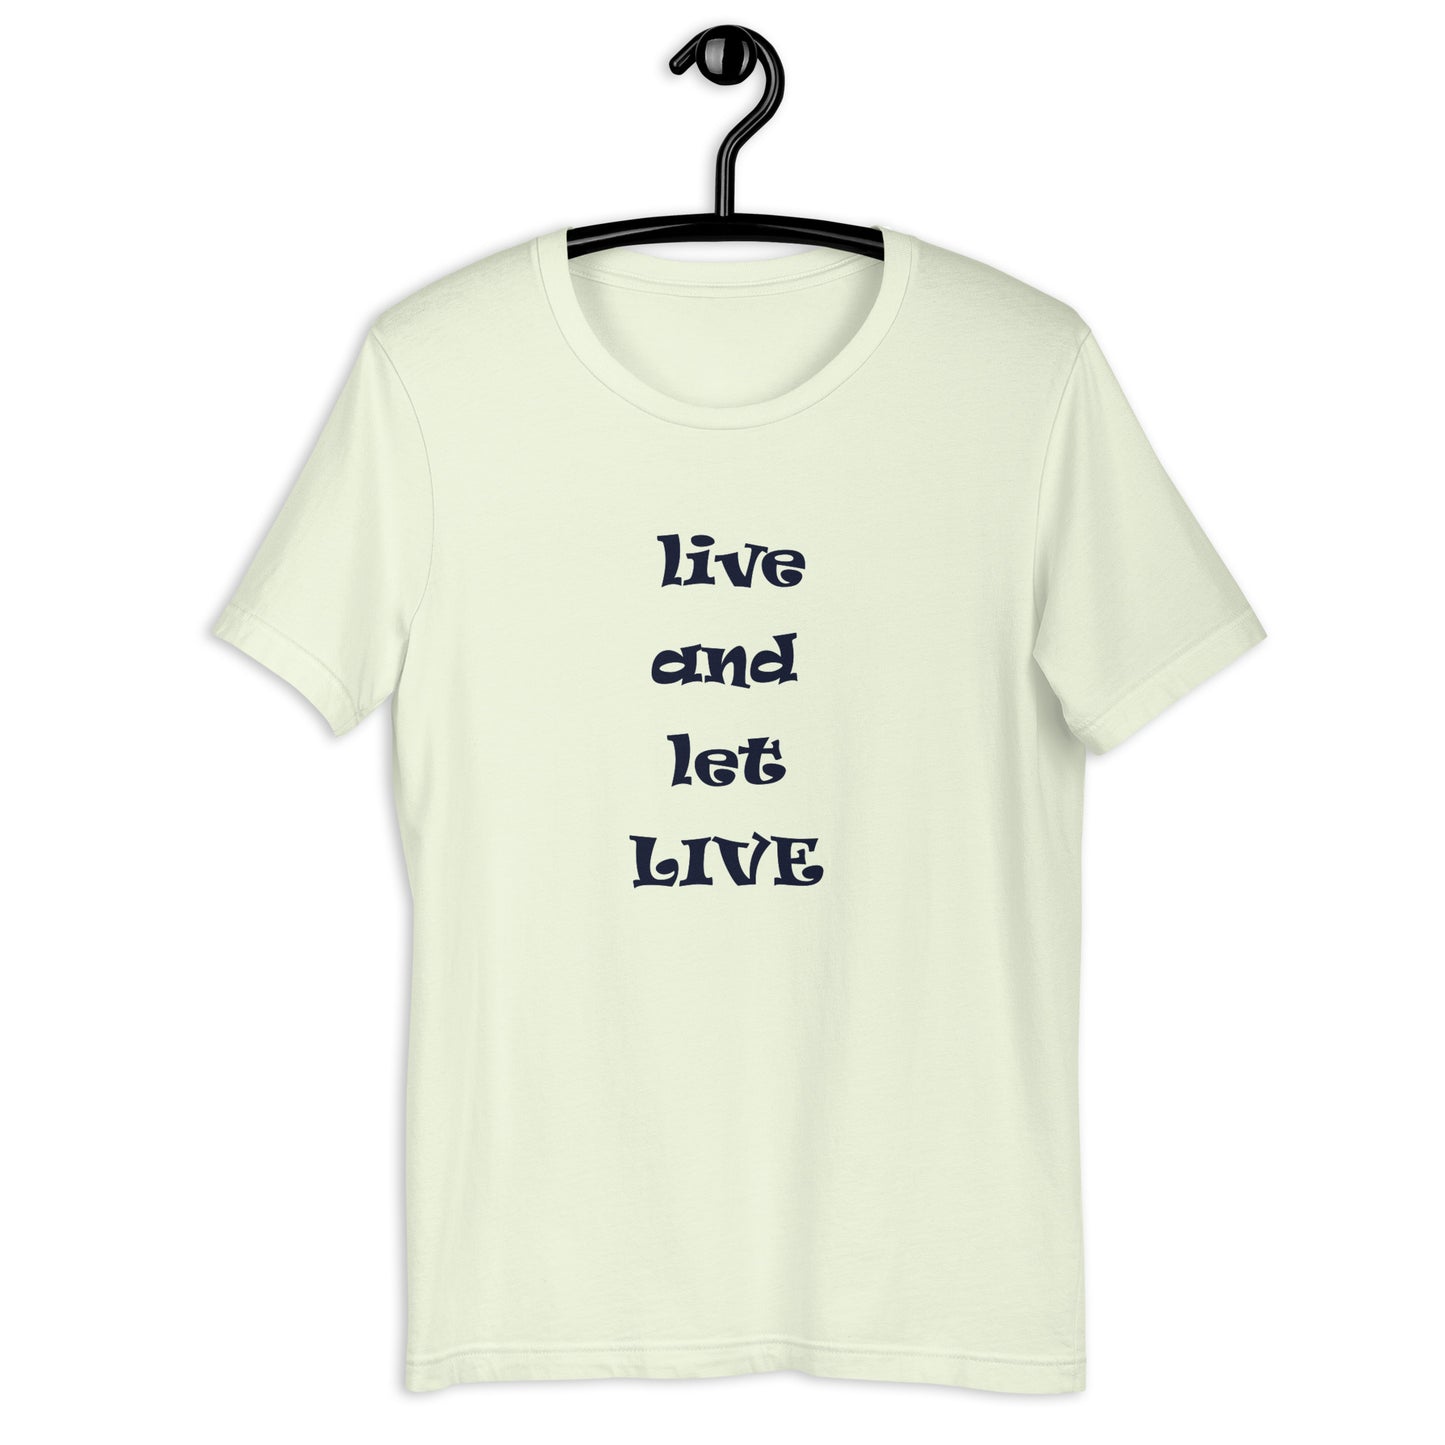 Live and Let Live unisex t-shirt